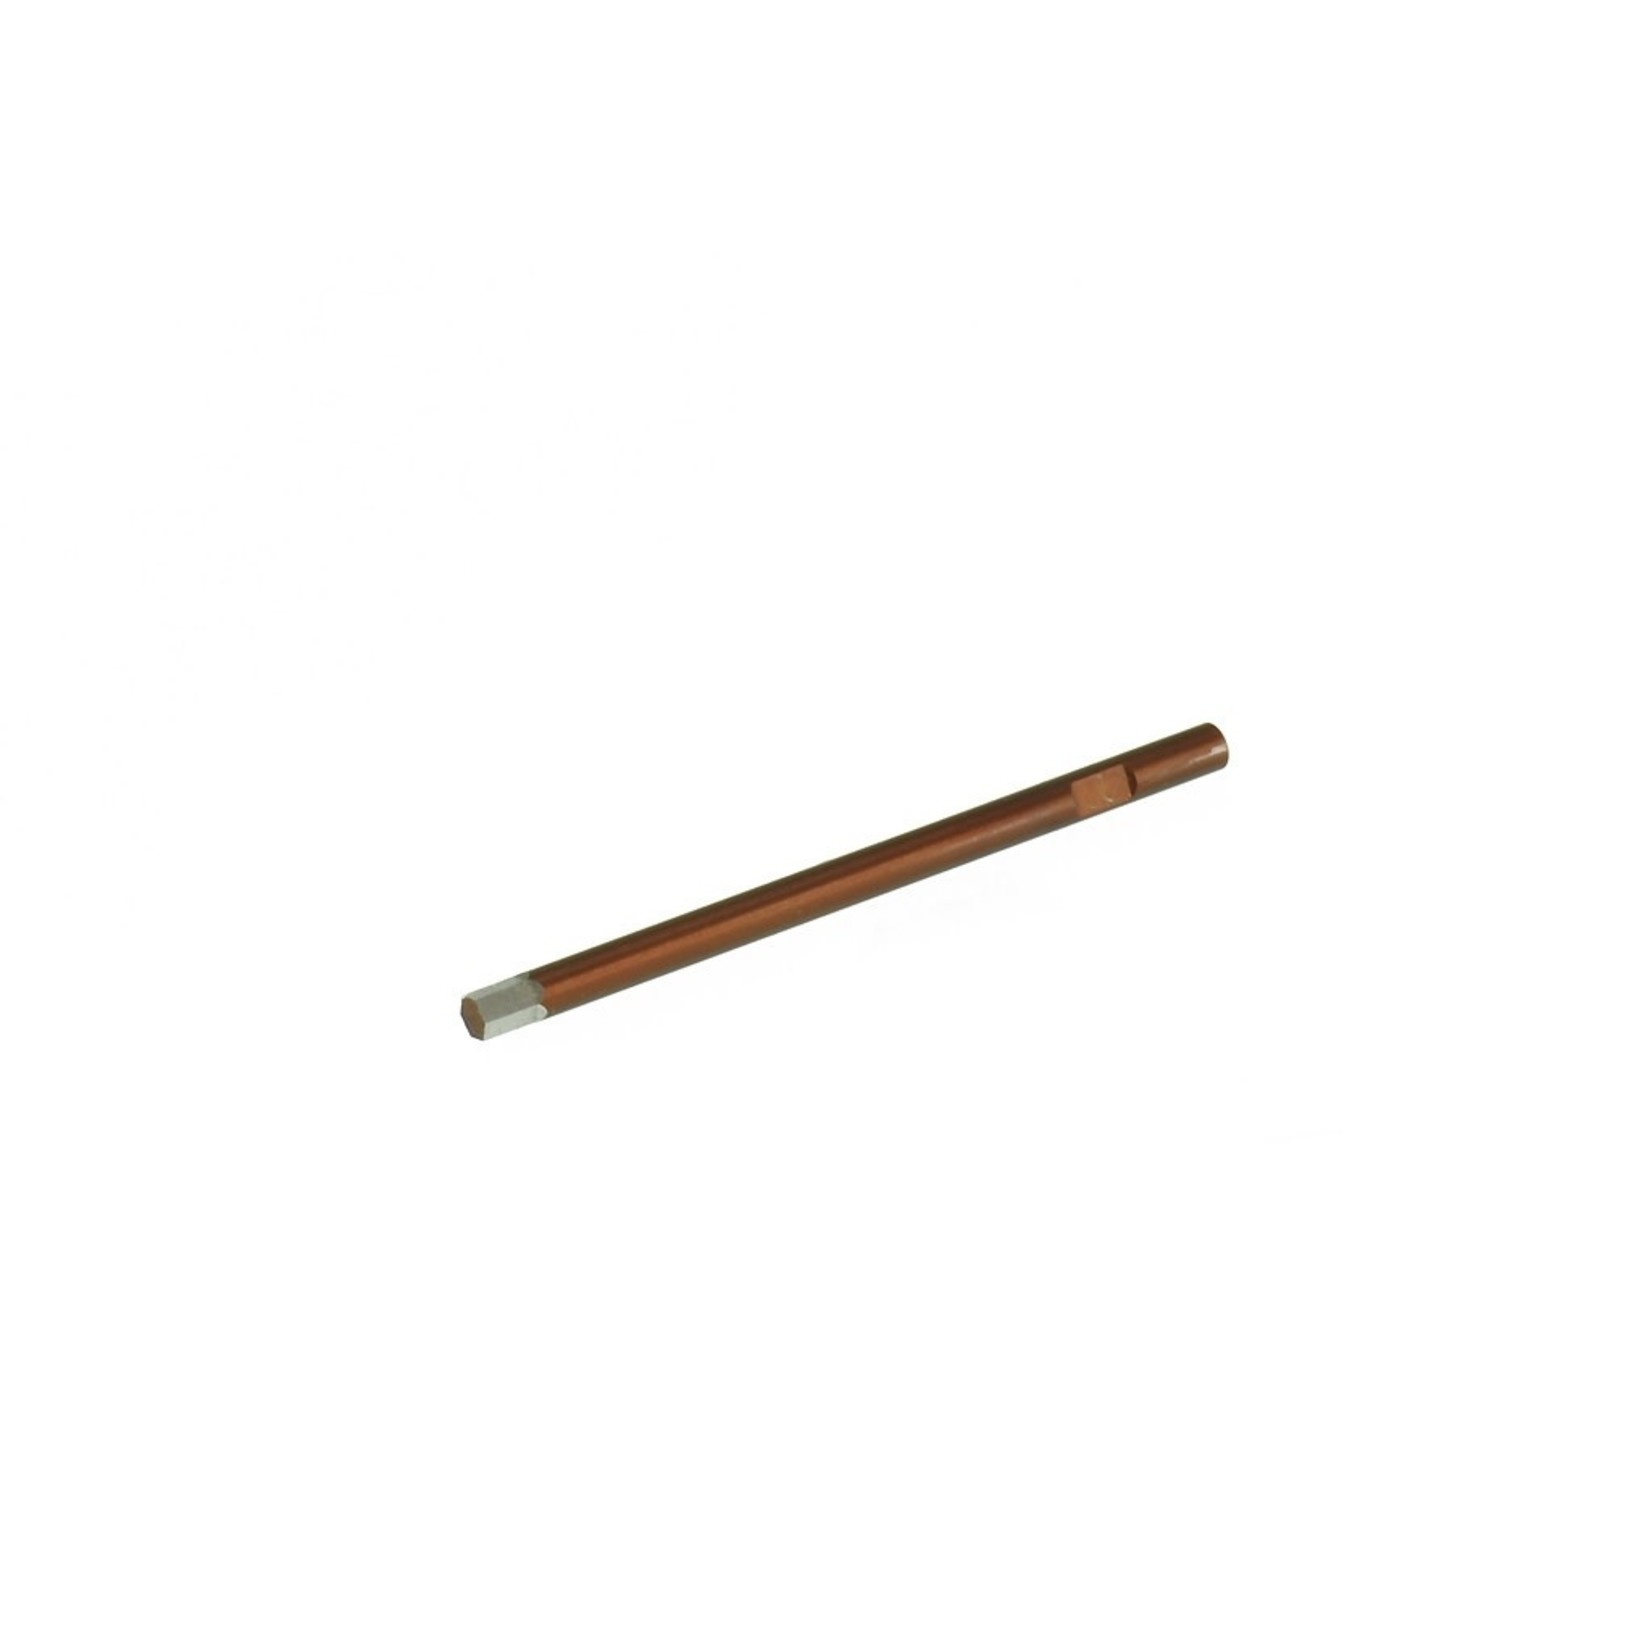 TEAM-EDS ALLEN WRENCH 3.0 X 60MM TIP ONLY